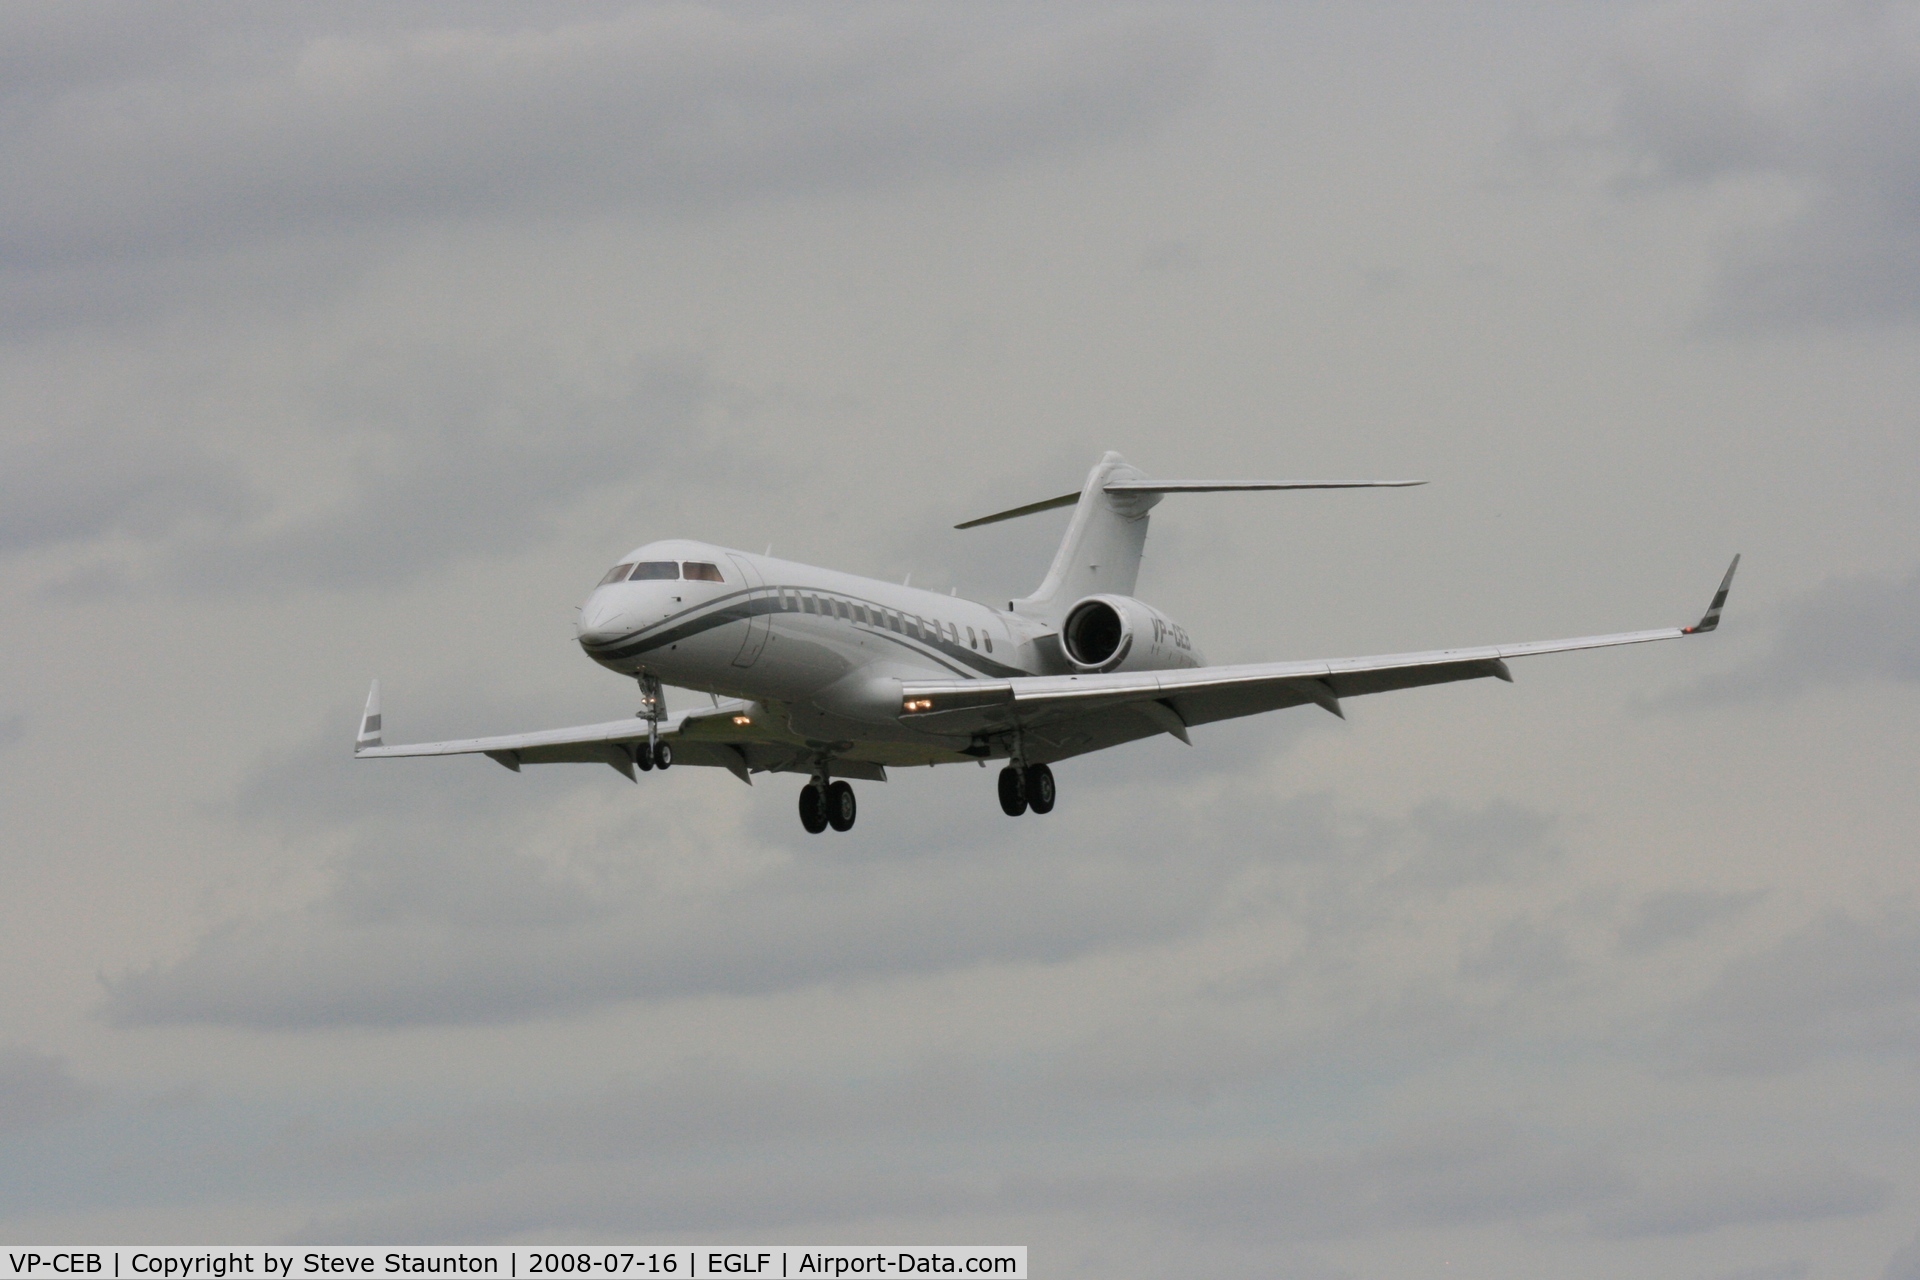 VP-CEB, 2001 Bombardier BD-700-1A10 Global Express C/N 9083, Taken at Farnborough Airshow on the Wednesday trade day, 16th July 2009